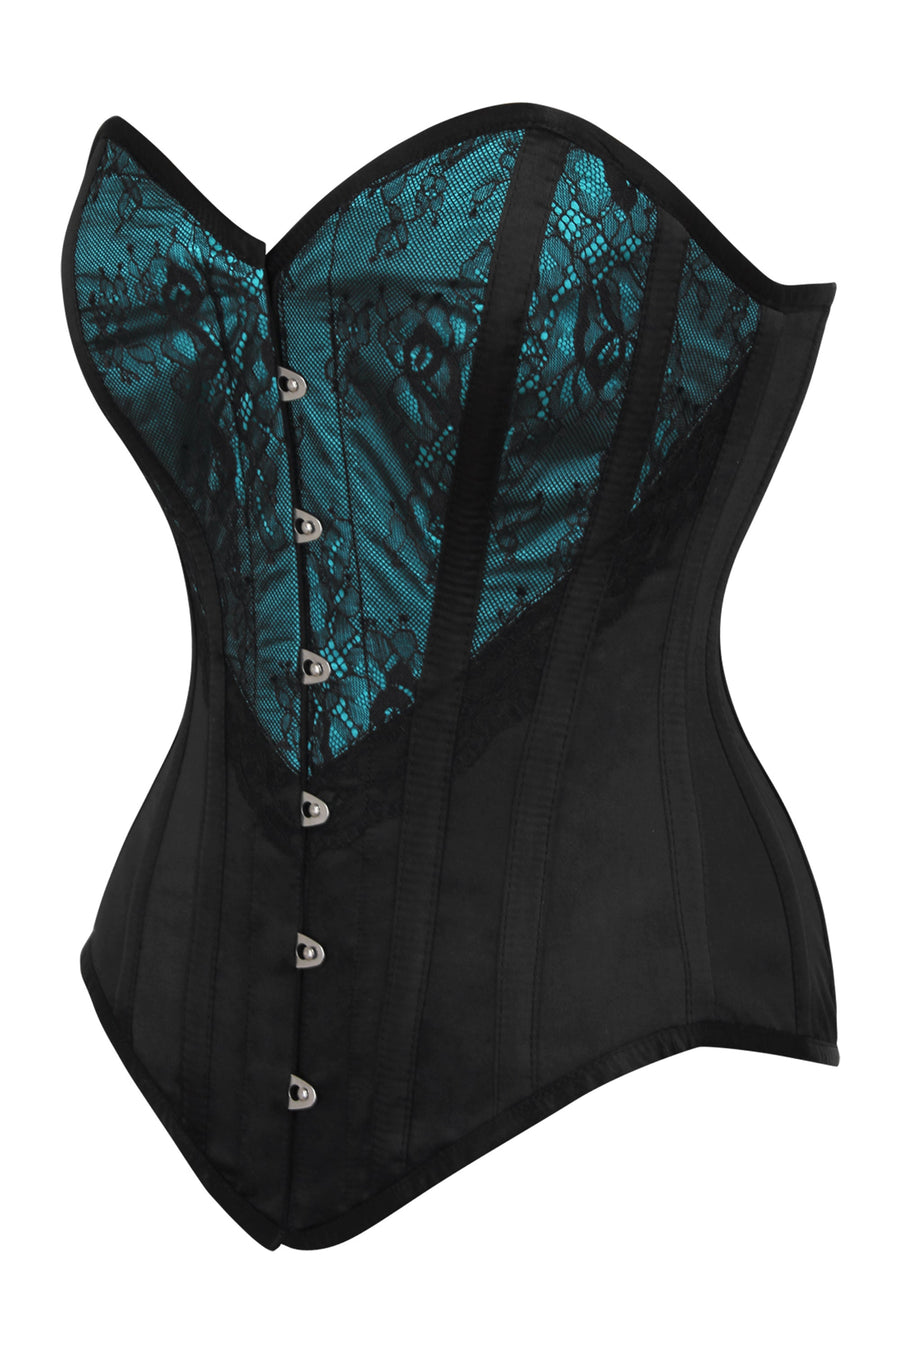 Classic Stripes Corset, Slim Silhouette, Regular** PHOTO SAMPLE, ONLY SIZE  22 IS AVAILABLE